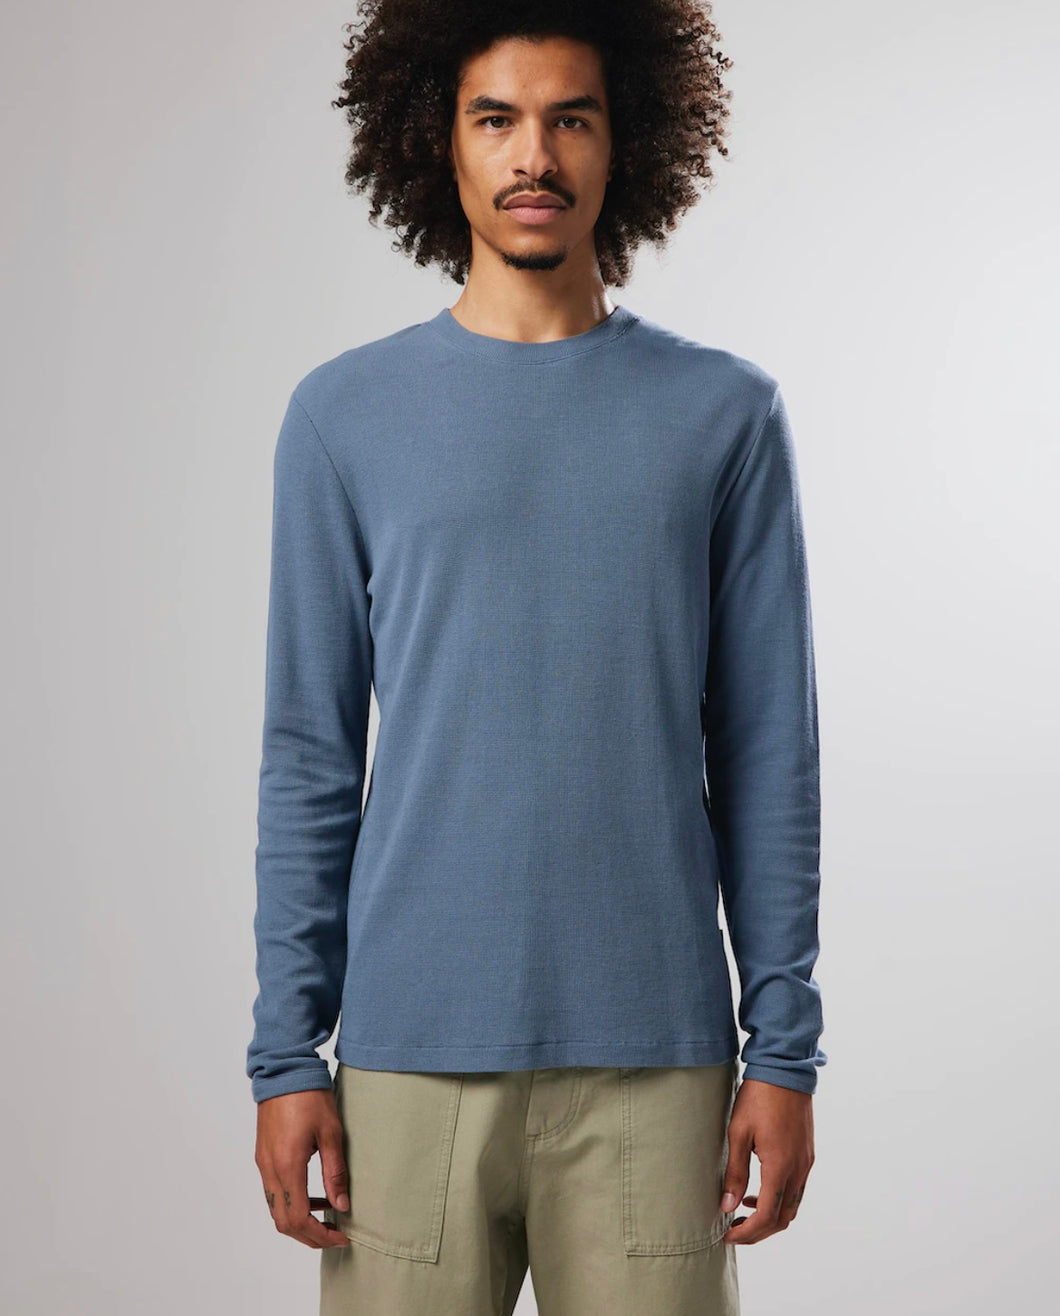 No Nationality Clive Cotton Blend Tee in Swedish Blue